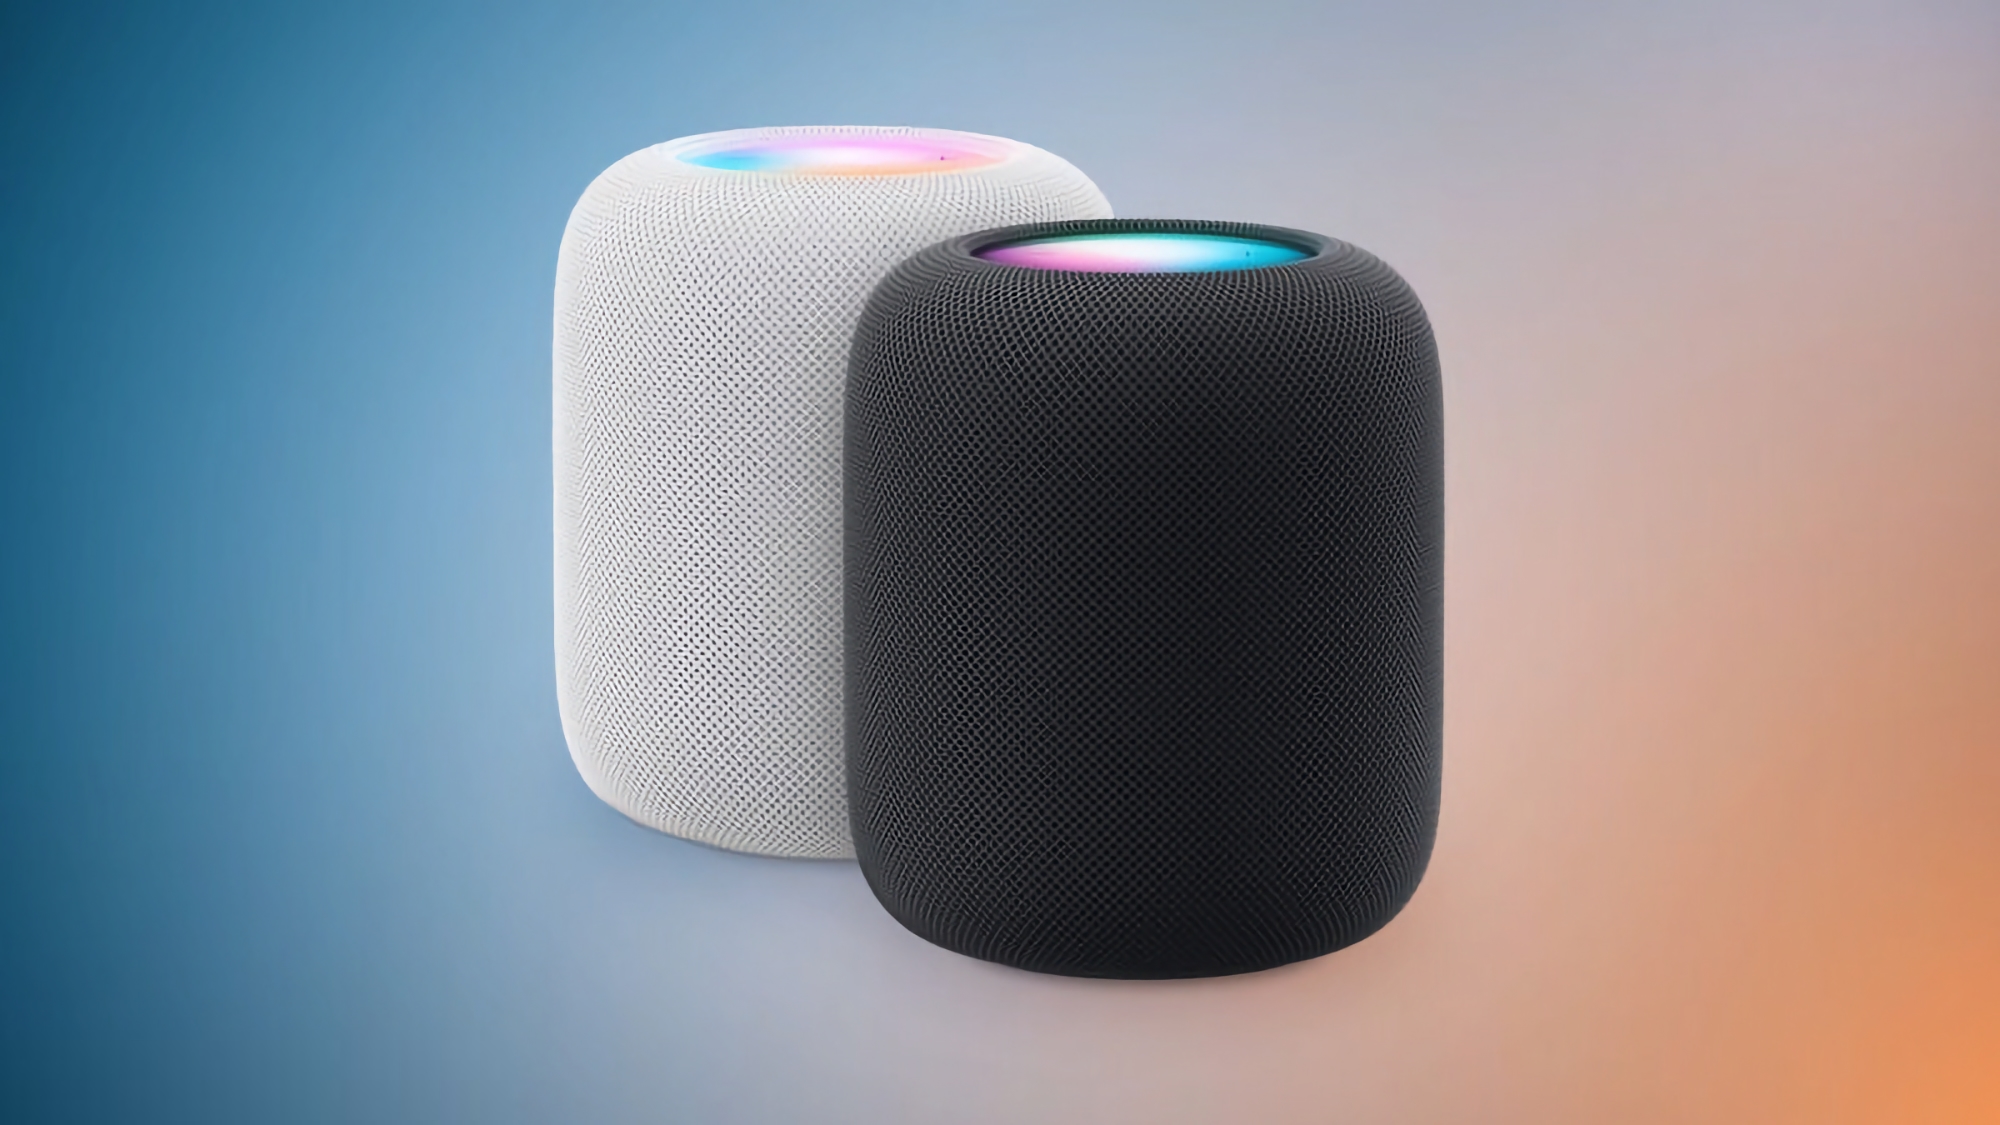 Not just iOS 16.3.1, watchOS 9.3.1 and macOS 13.2.1: Apple releases new version of HomePod smart speaker software